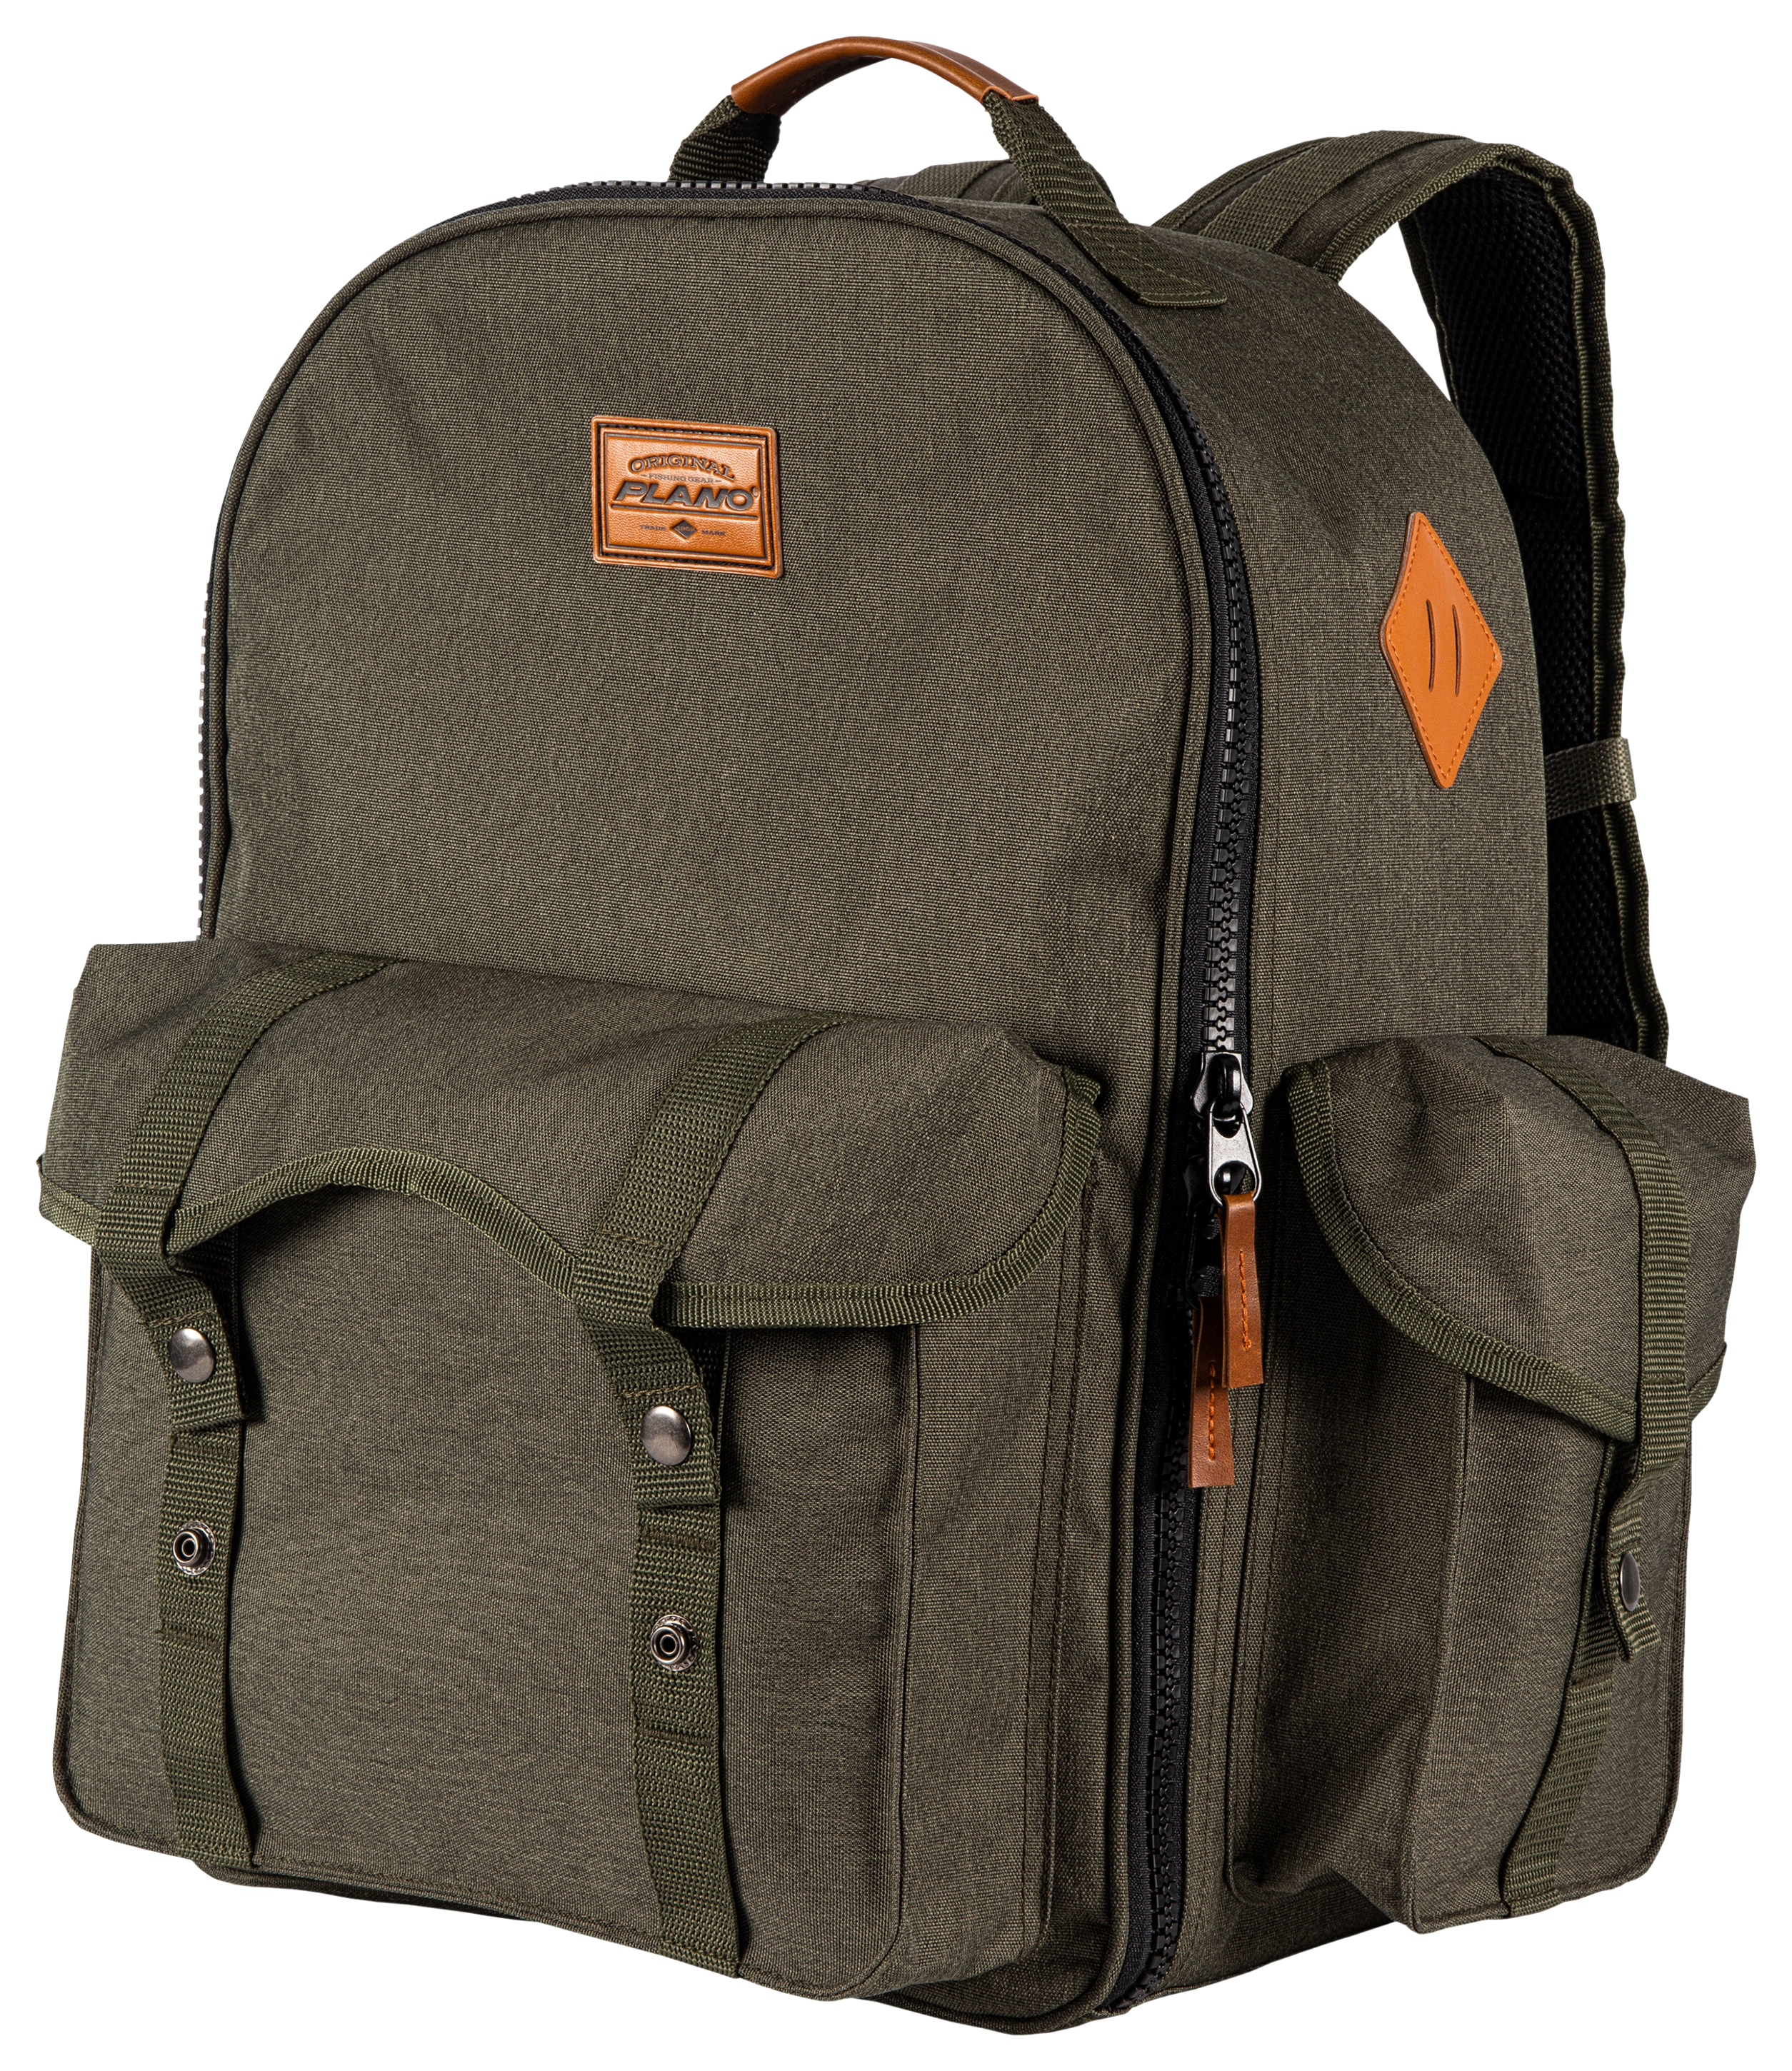 Plano A-Series 2.0 Backpack